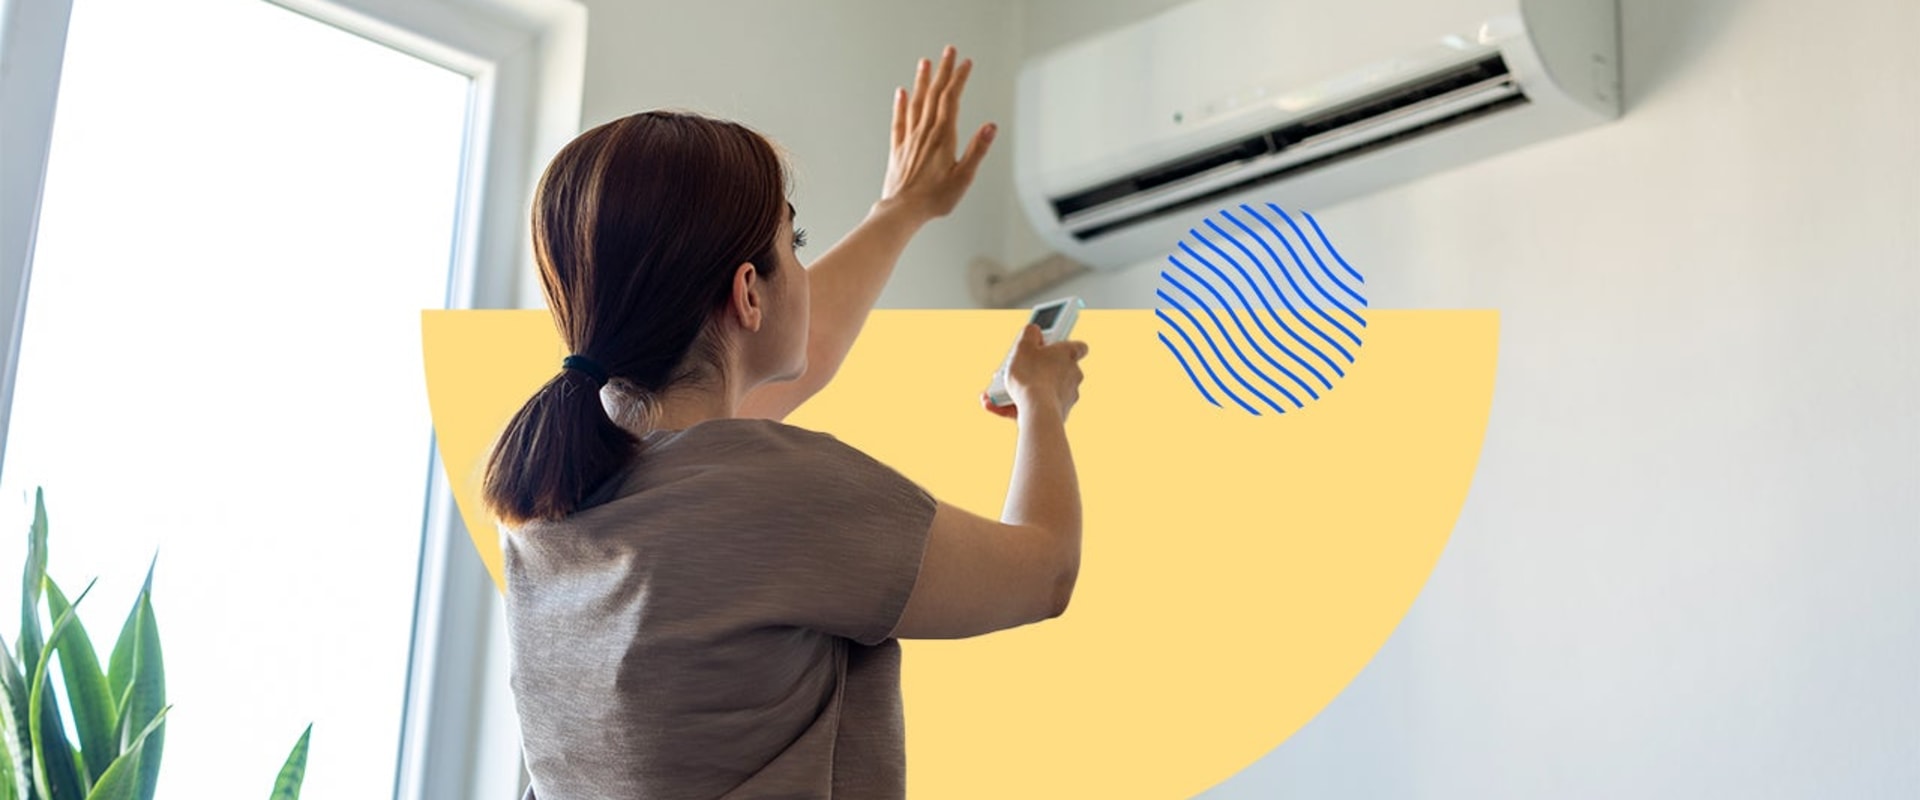 How to Keep Your Air Conditioner in Optimal Condition